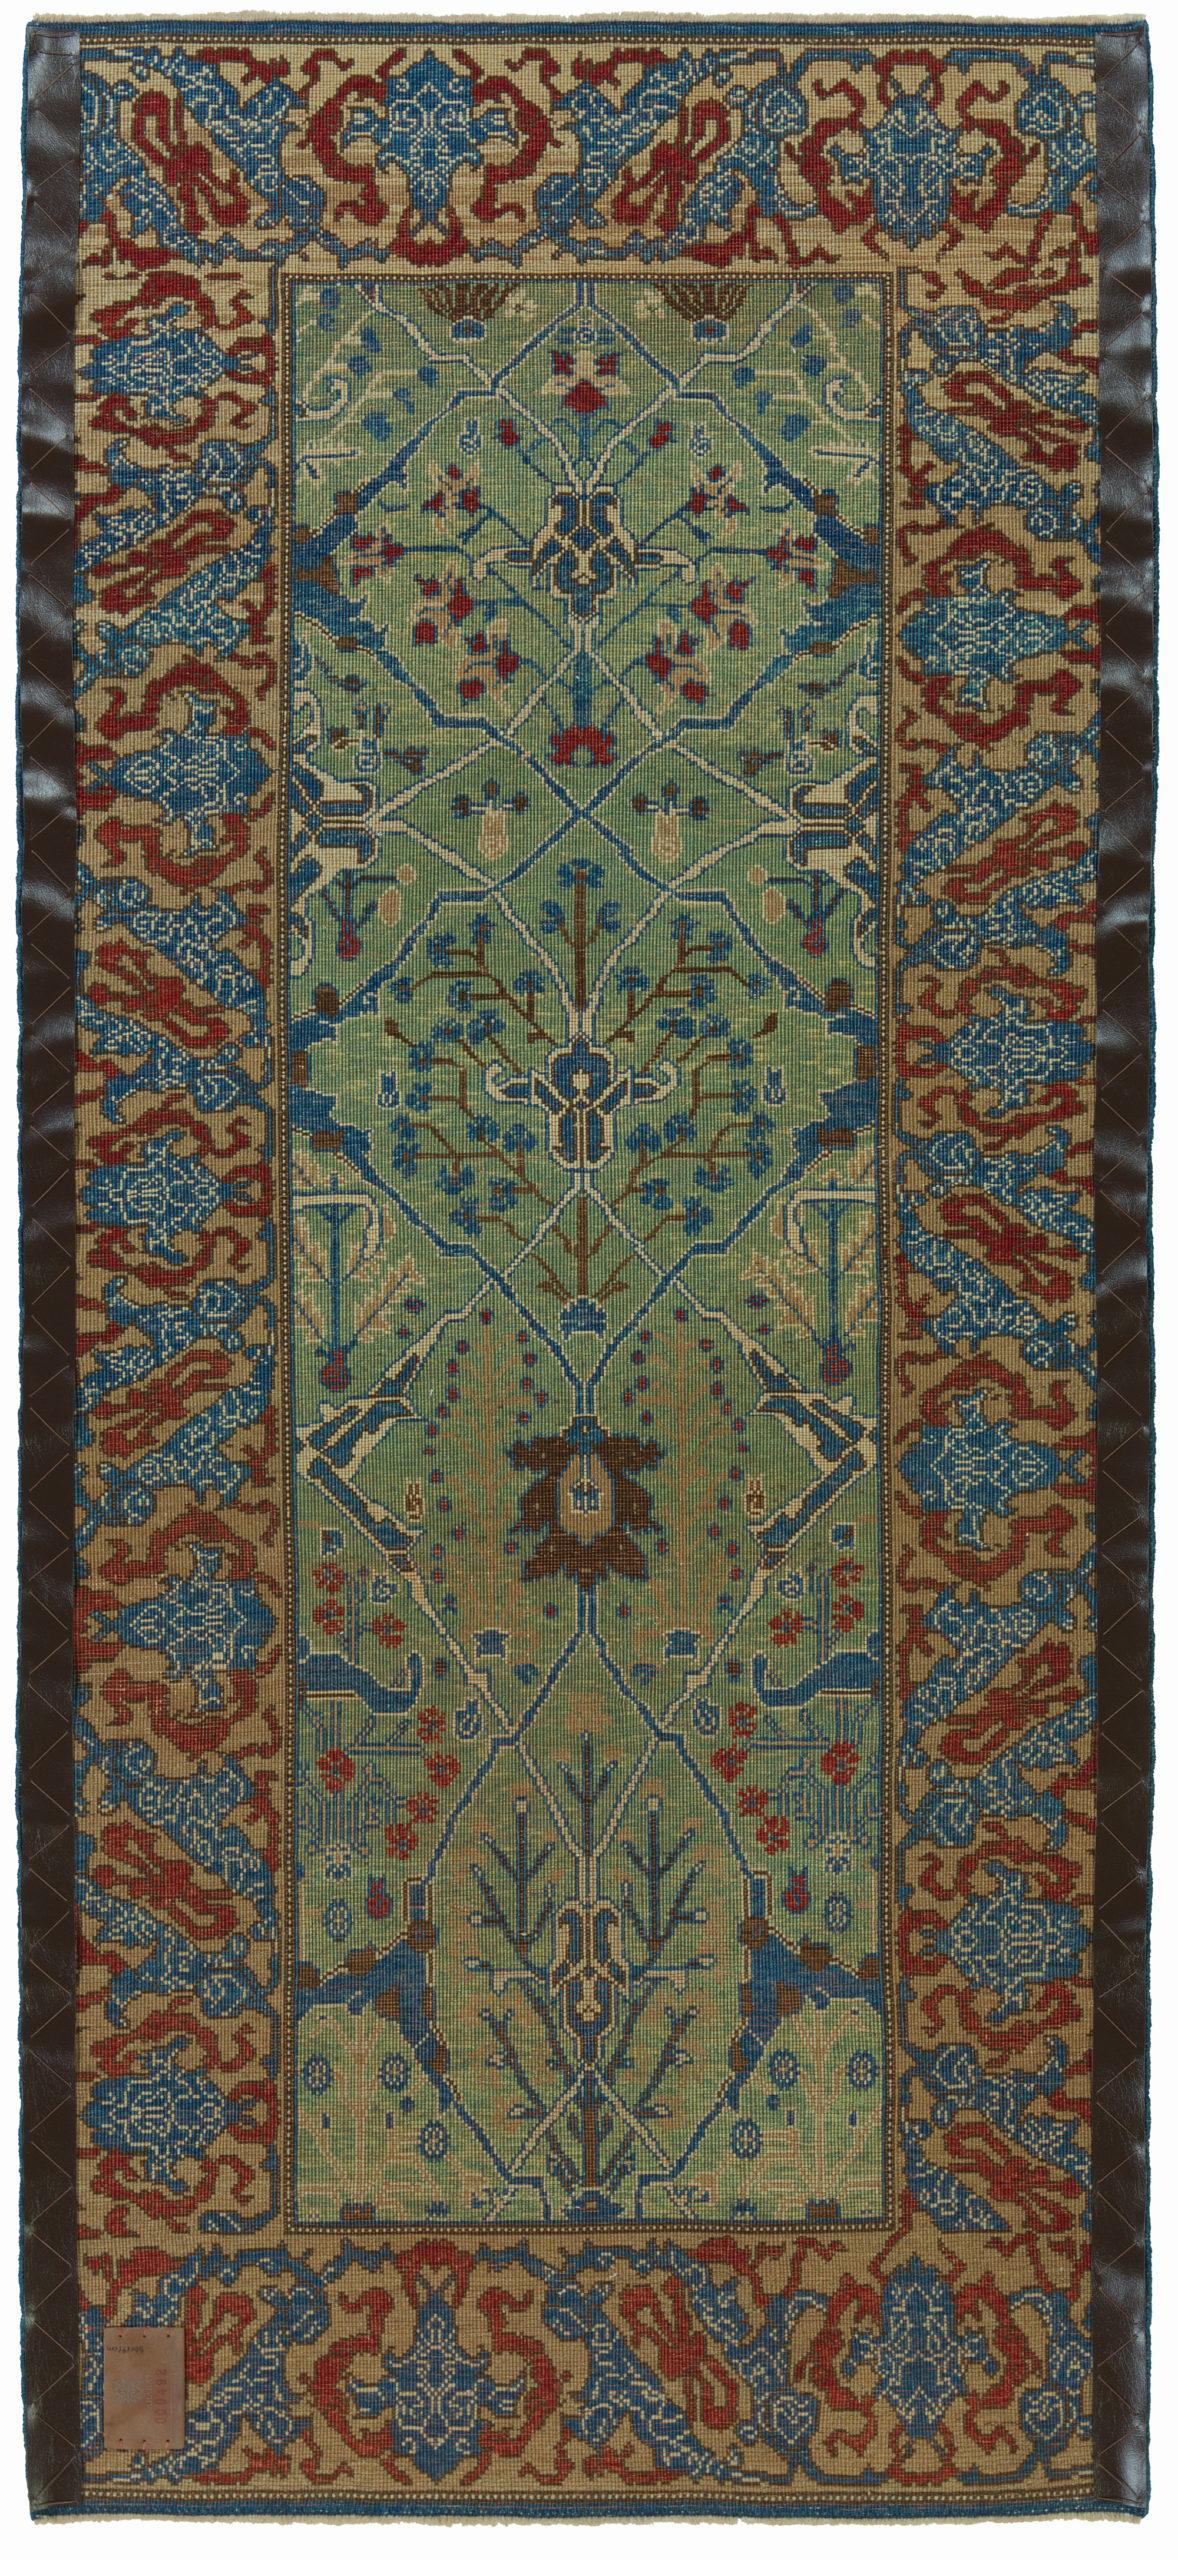 The design source of the rug comes from the book Islamic Carpets, Joseph V. McMullan, Near Eastern Art Research Center Inc., New York 1965 nr.22. This is a system of arabesque-designed 19th-century rugs from Gerous ( Garrus or Garus ) region,